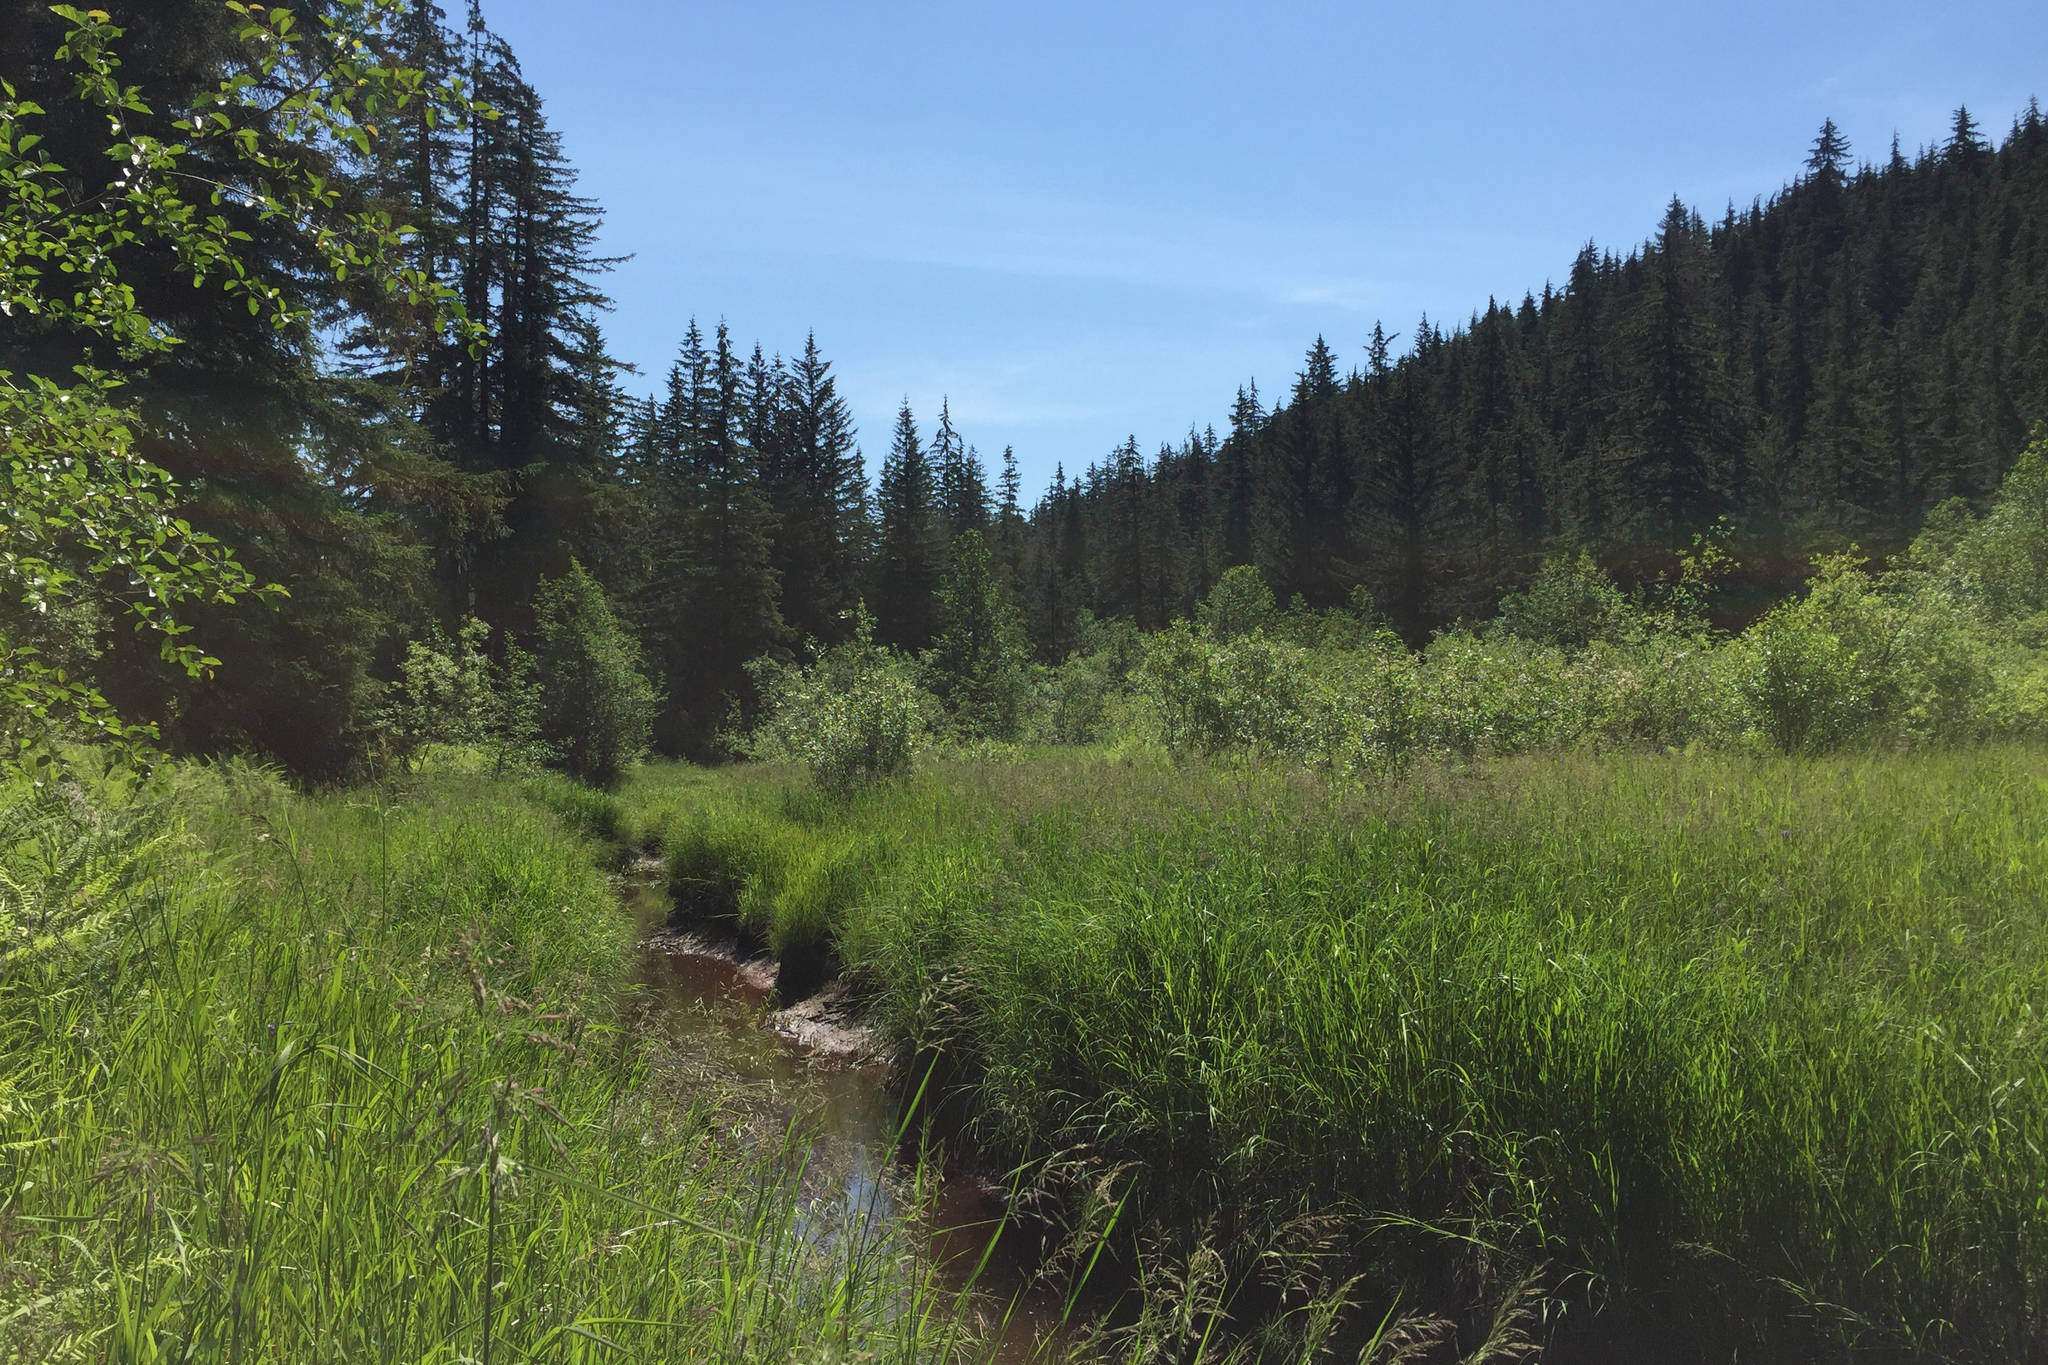 The Southeast Alaska Land Trust announced Tuesday it finalized the purchase of over 70 acres in the Herbert and Eagle River valley in Juneau, which they plan to call the “Very Beary Berry Wetlands.” (Courtesy Photo | SEAL Trust)